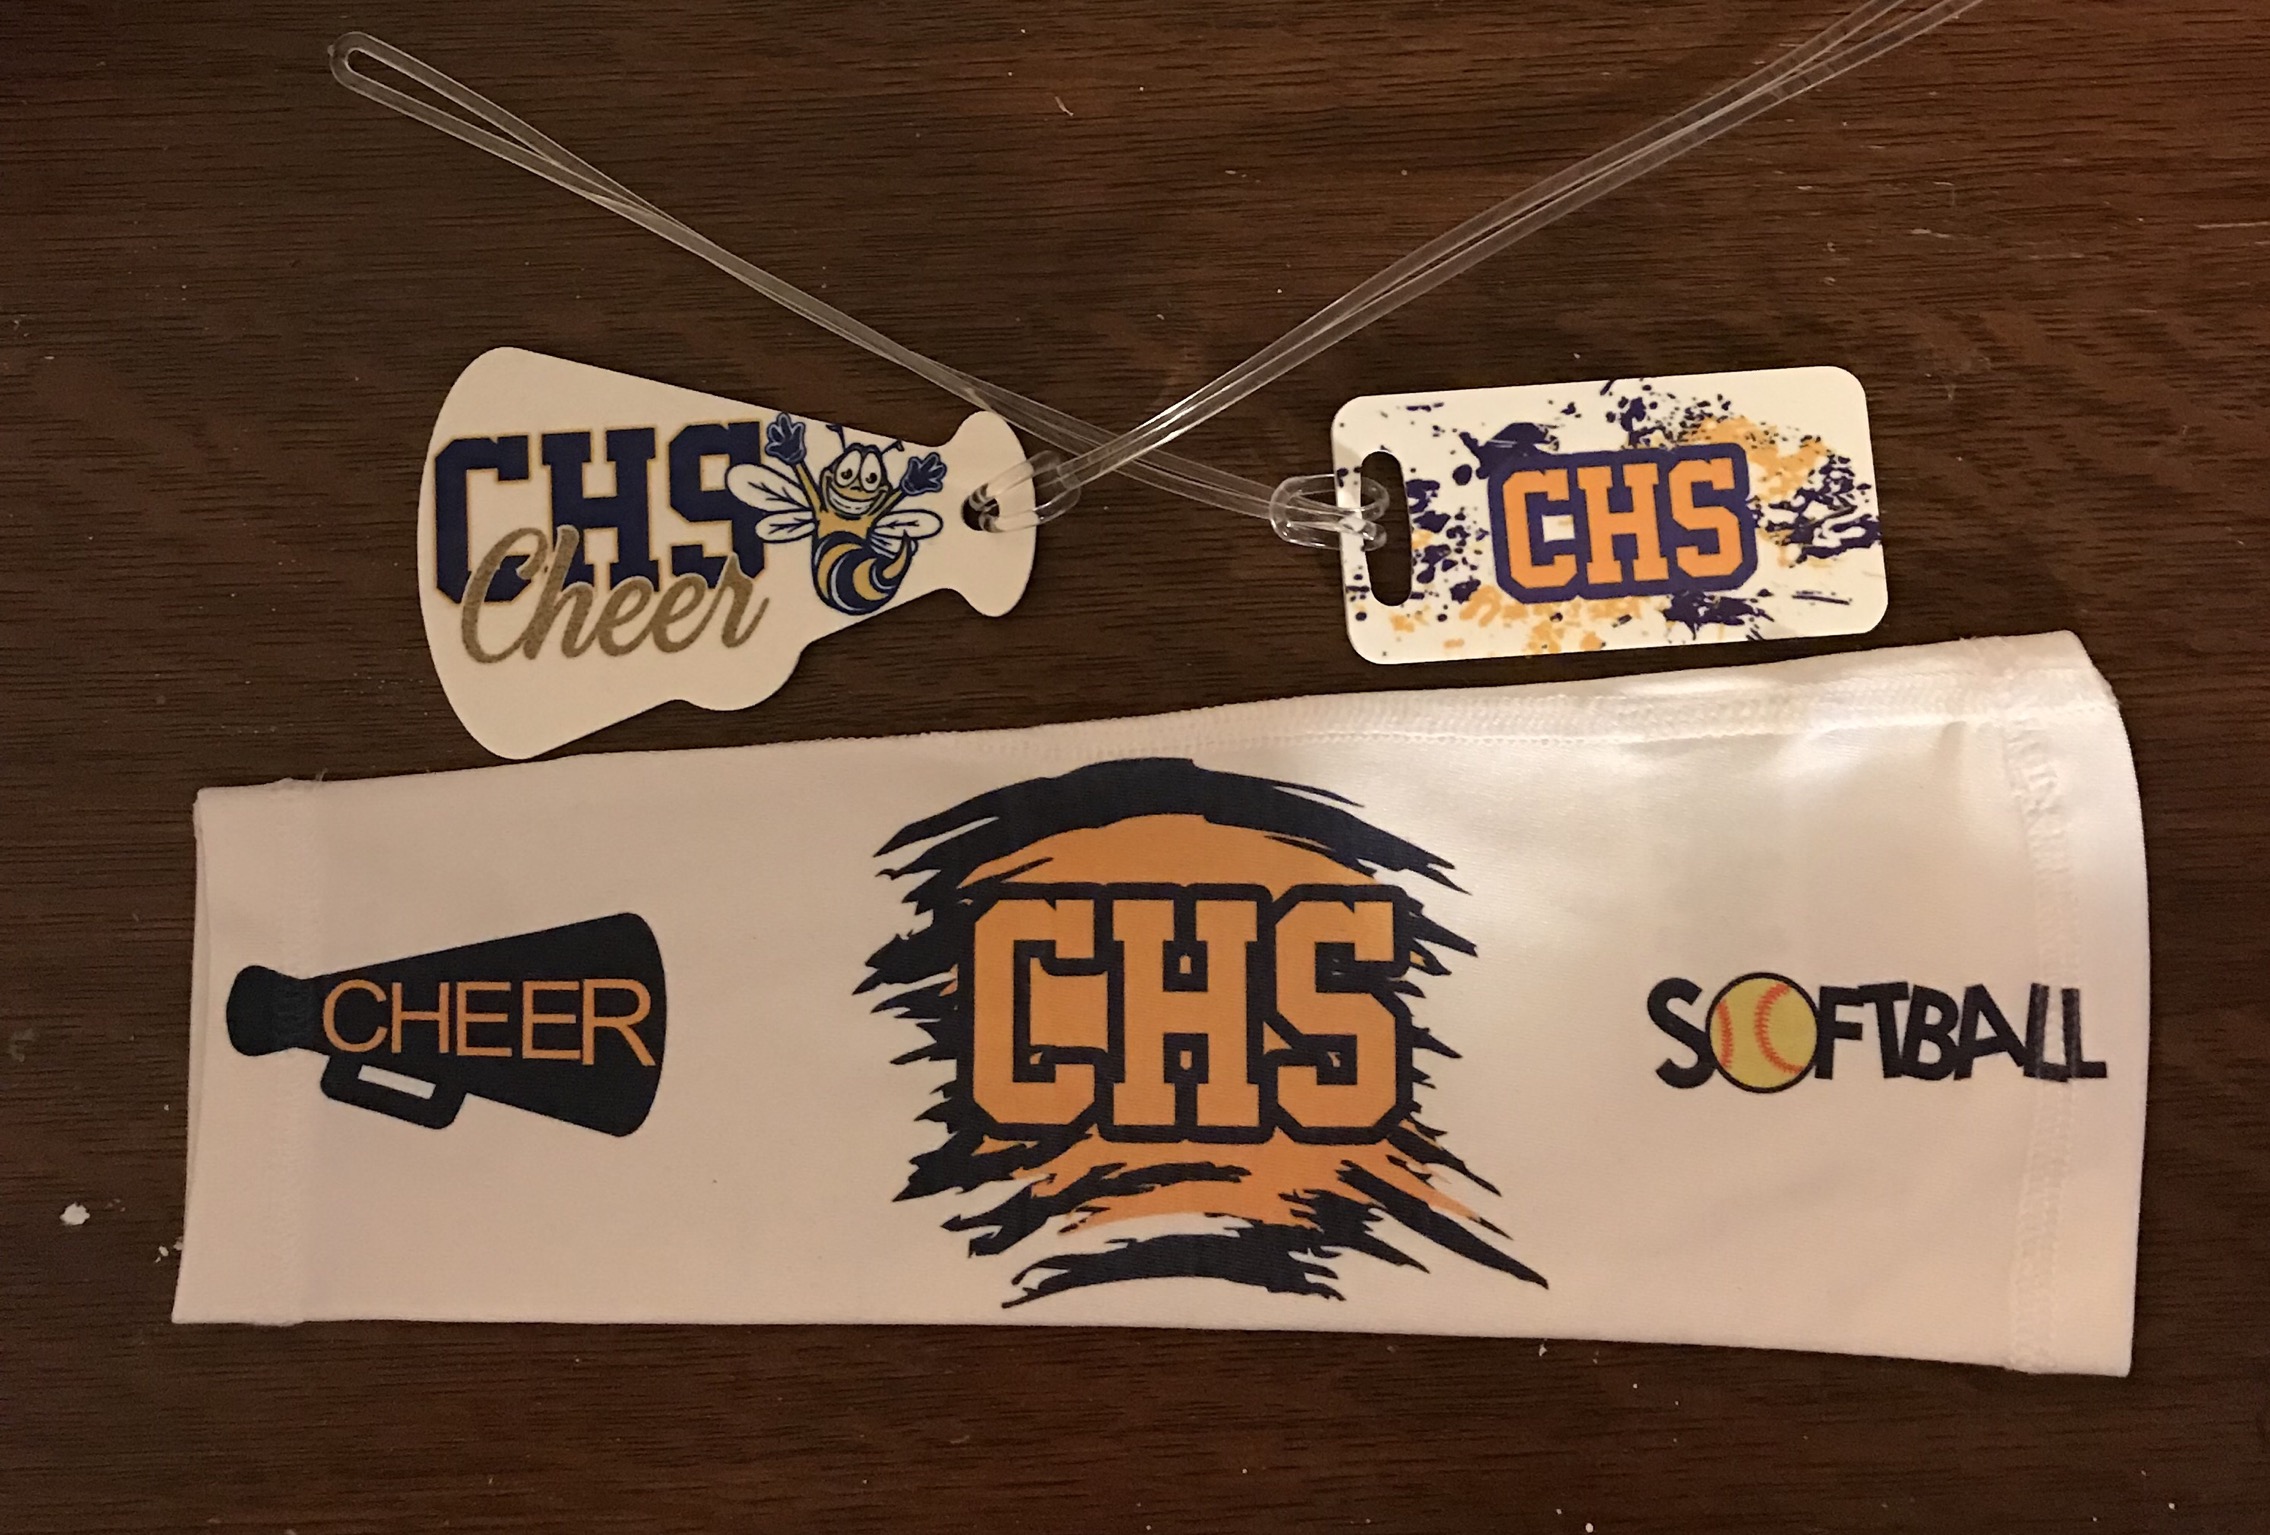 Go Hornets! made with sublimation printing